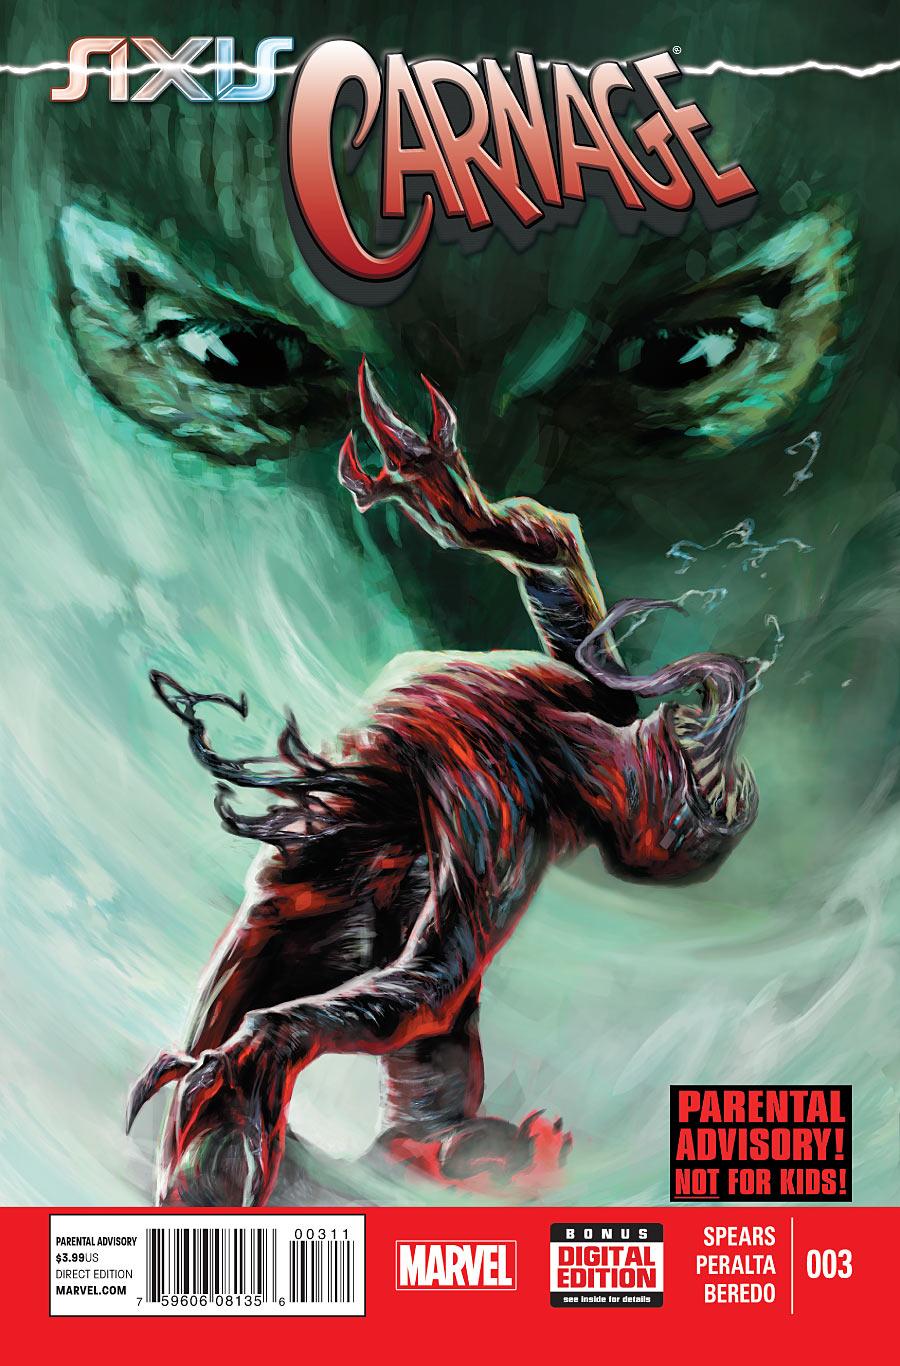 AXIS: Carnage Vol. 1 #3